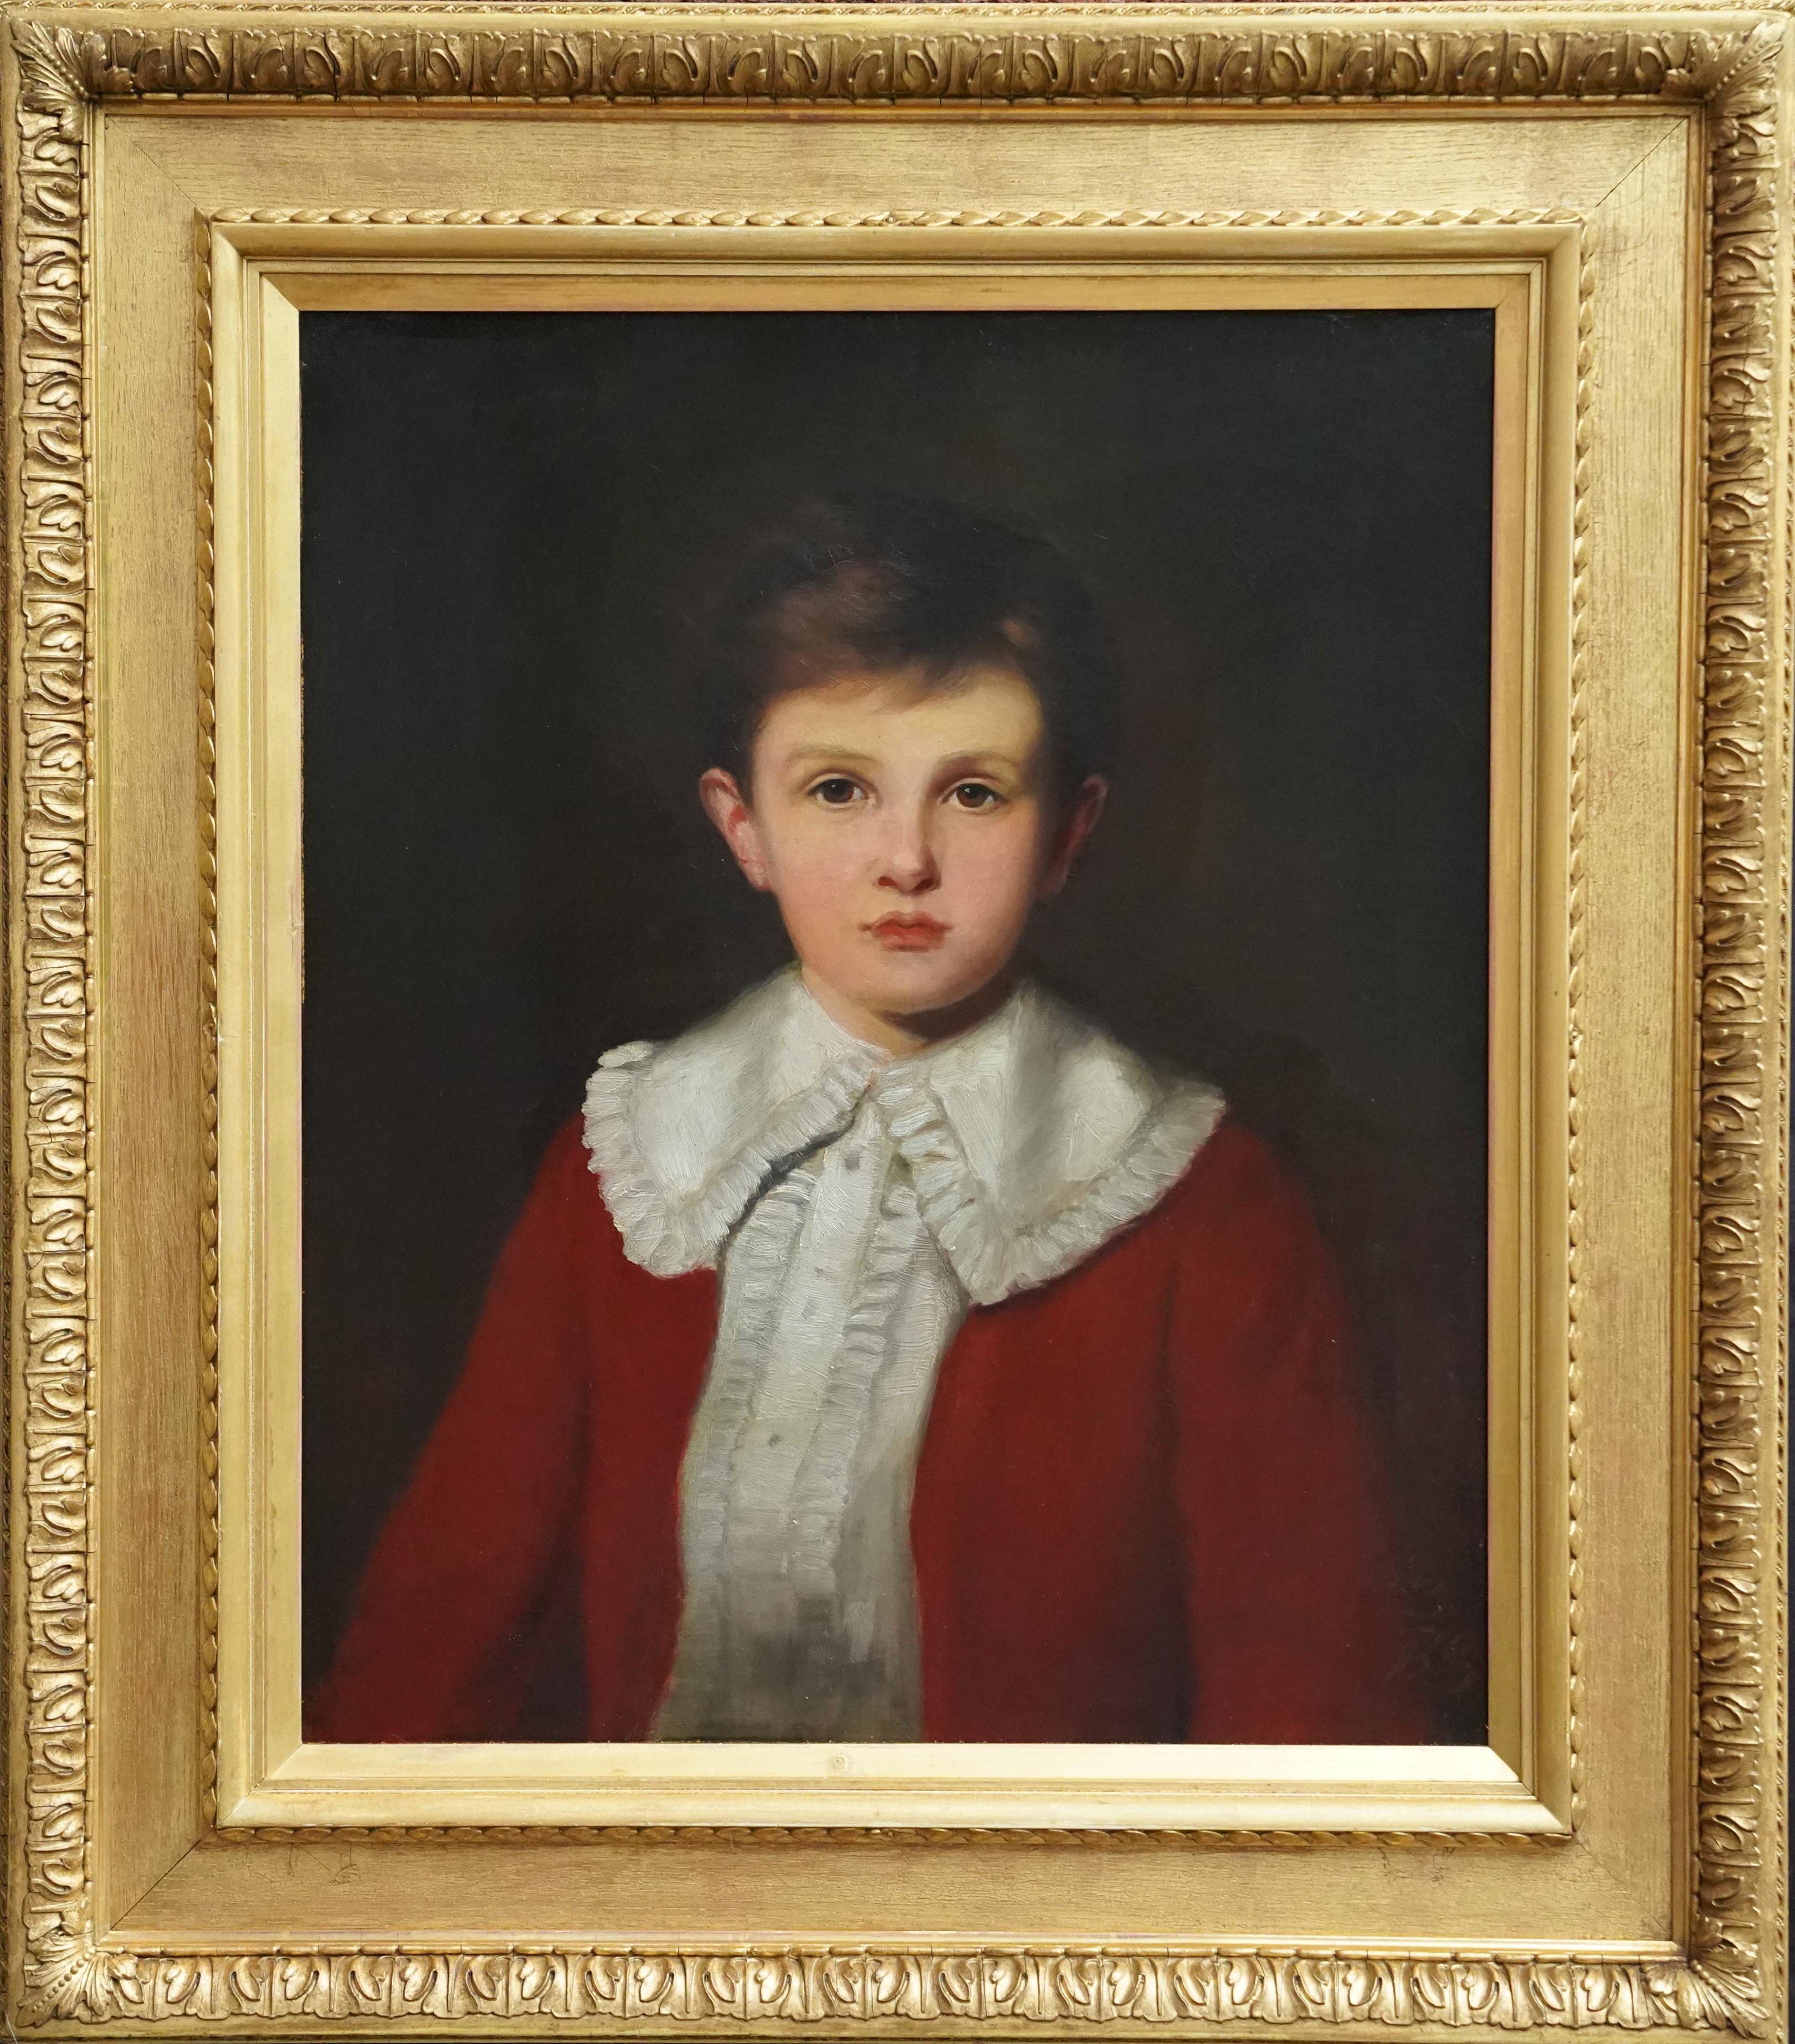 Gilbert Baldry Portrait Painting - Portrait of a Young Boy in Red Coat - British Victorian 1892 art oil painting